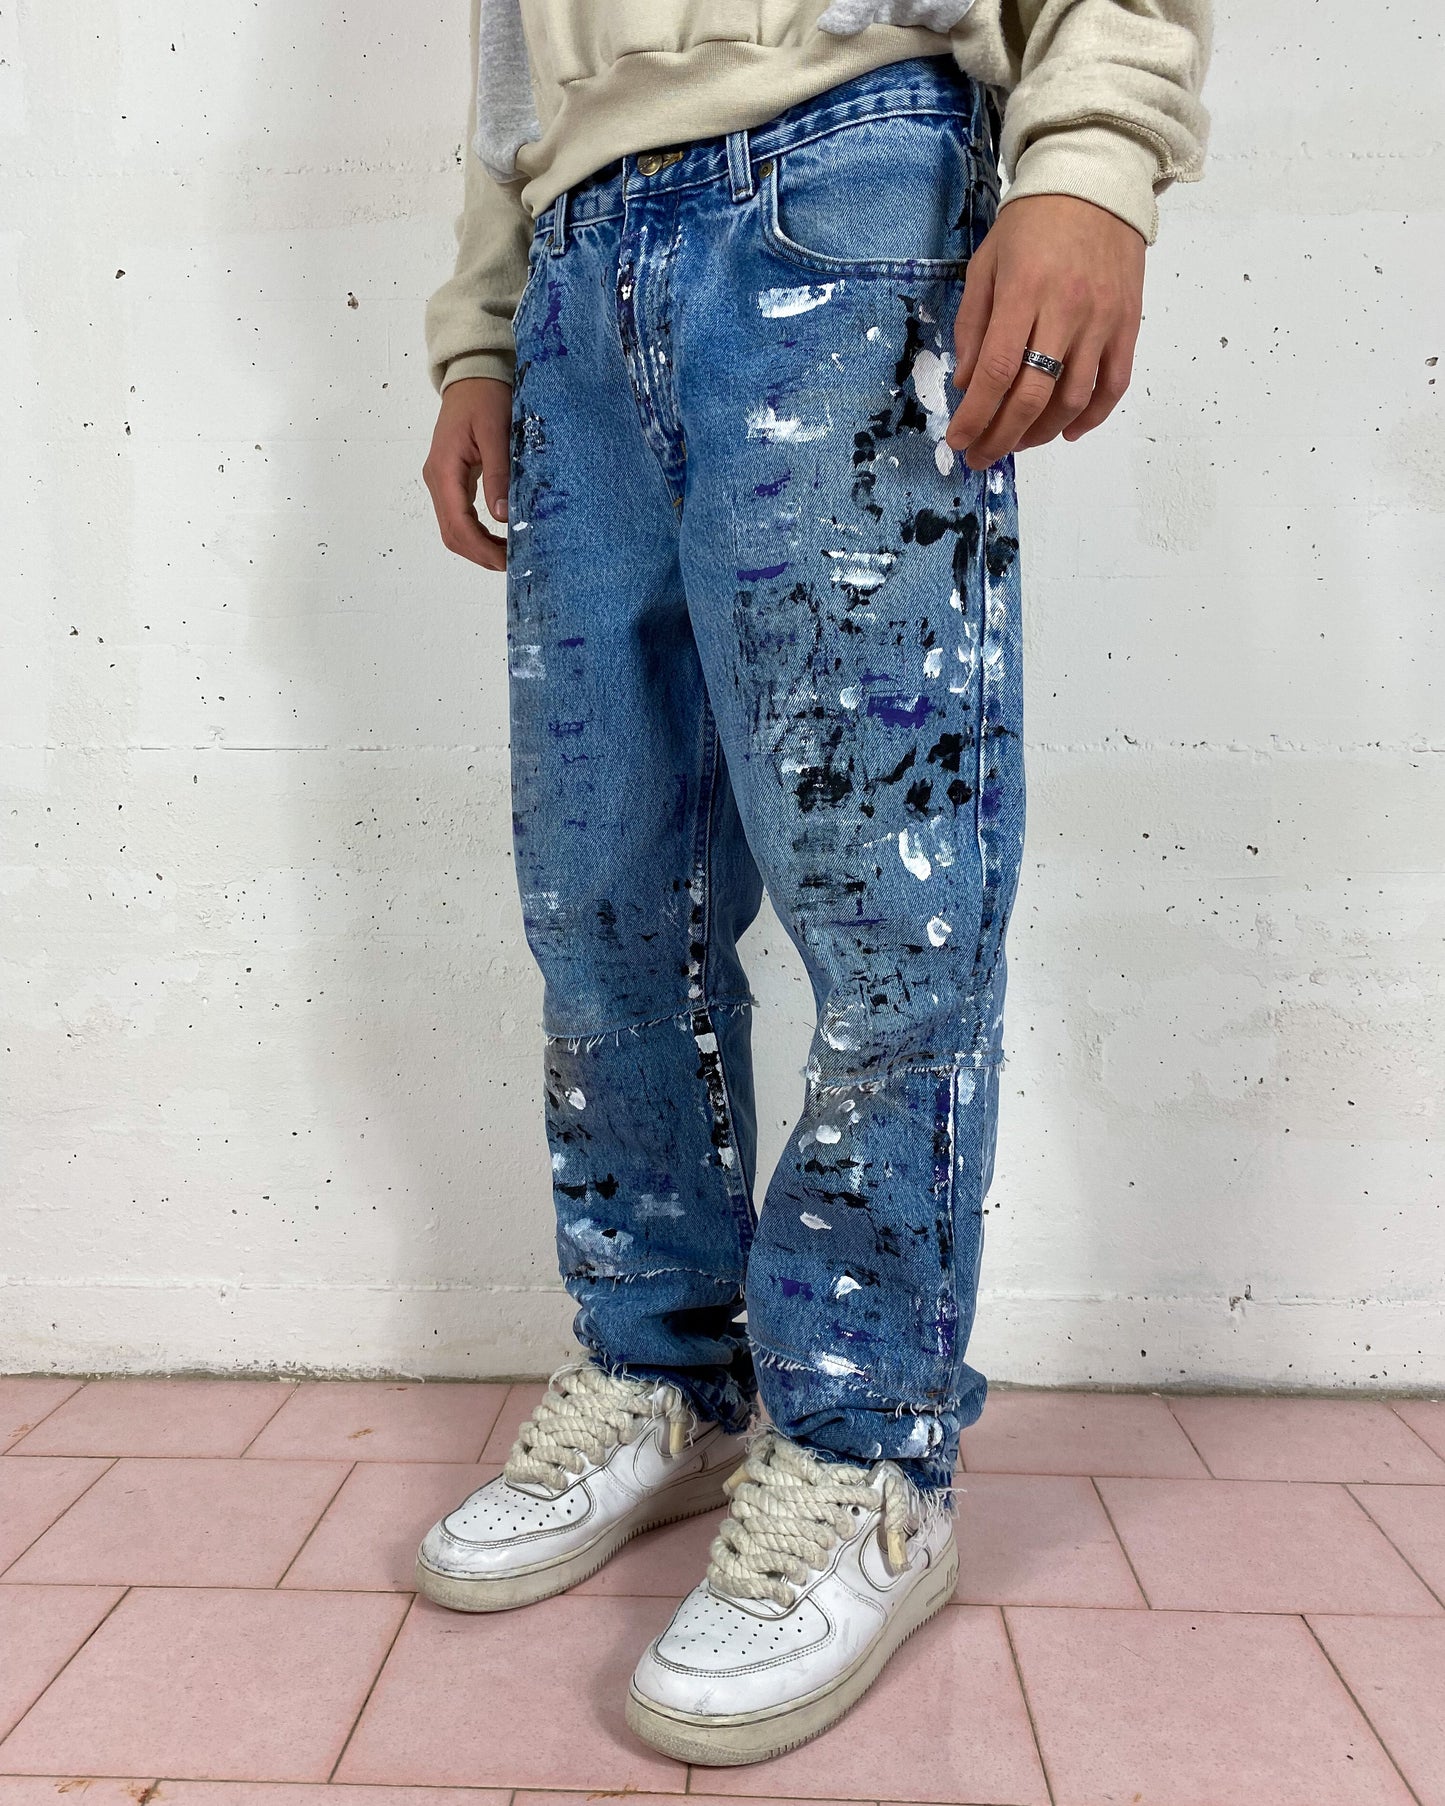 MULTI PAINTED JEANS V2 - Nicolò Puccini